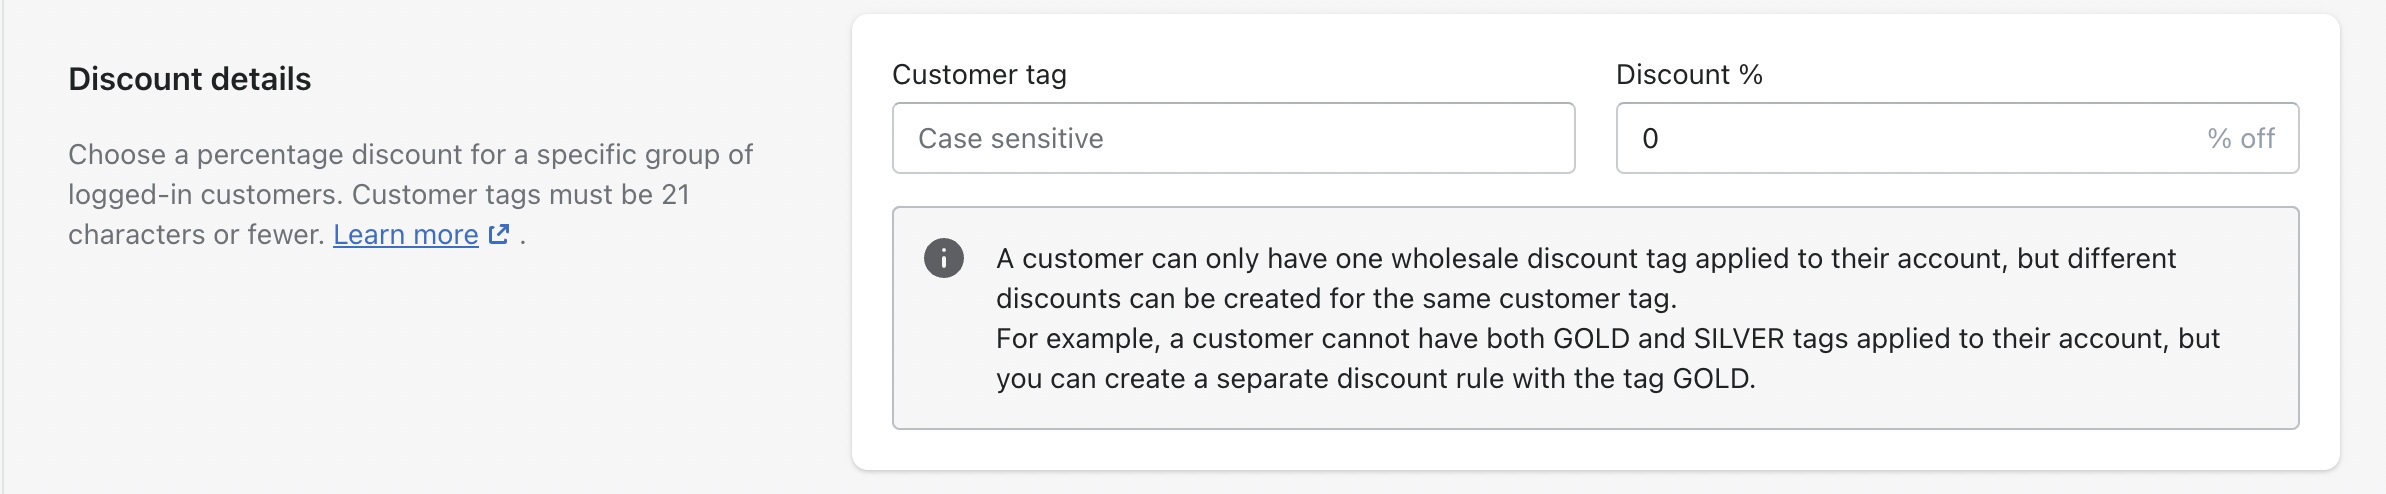 Discount details settings in Wholesale Club where a discount level can be set and a tag name can be created.